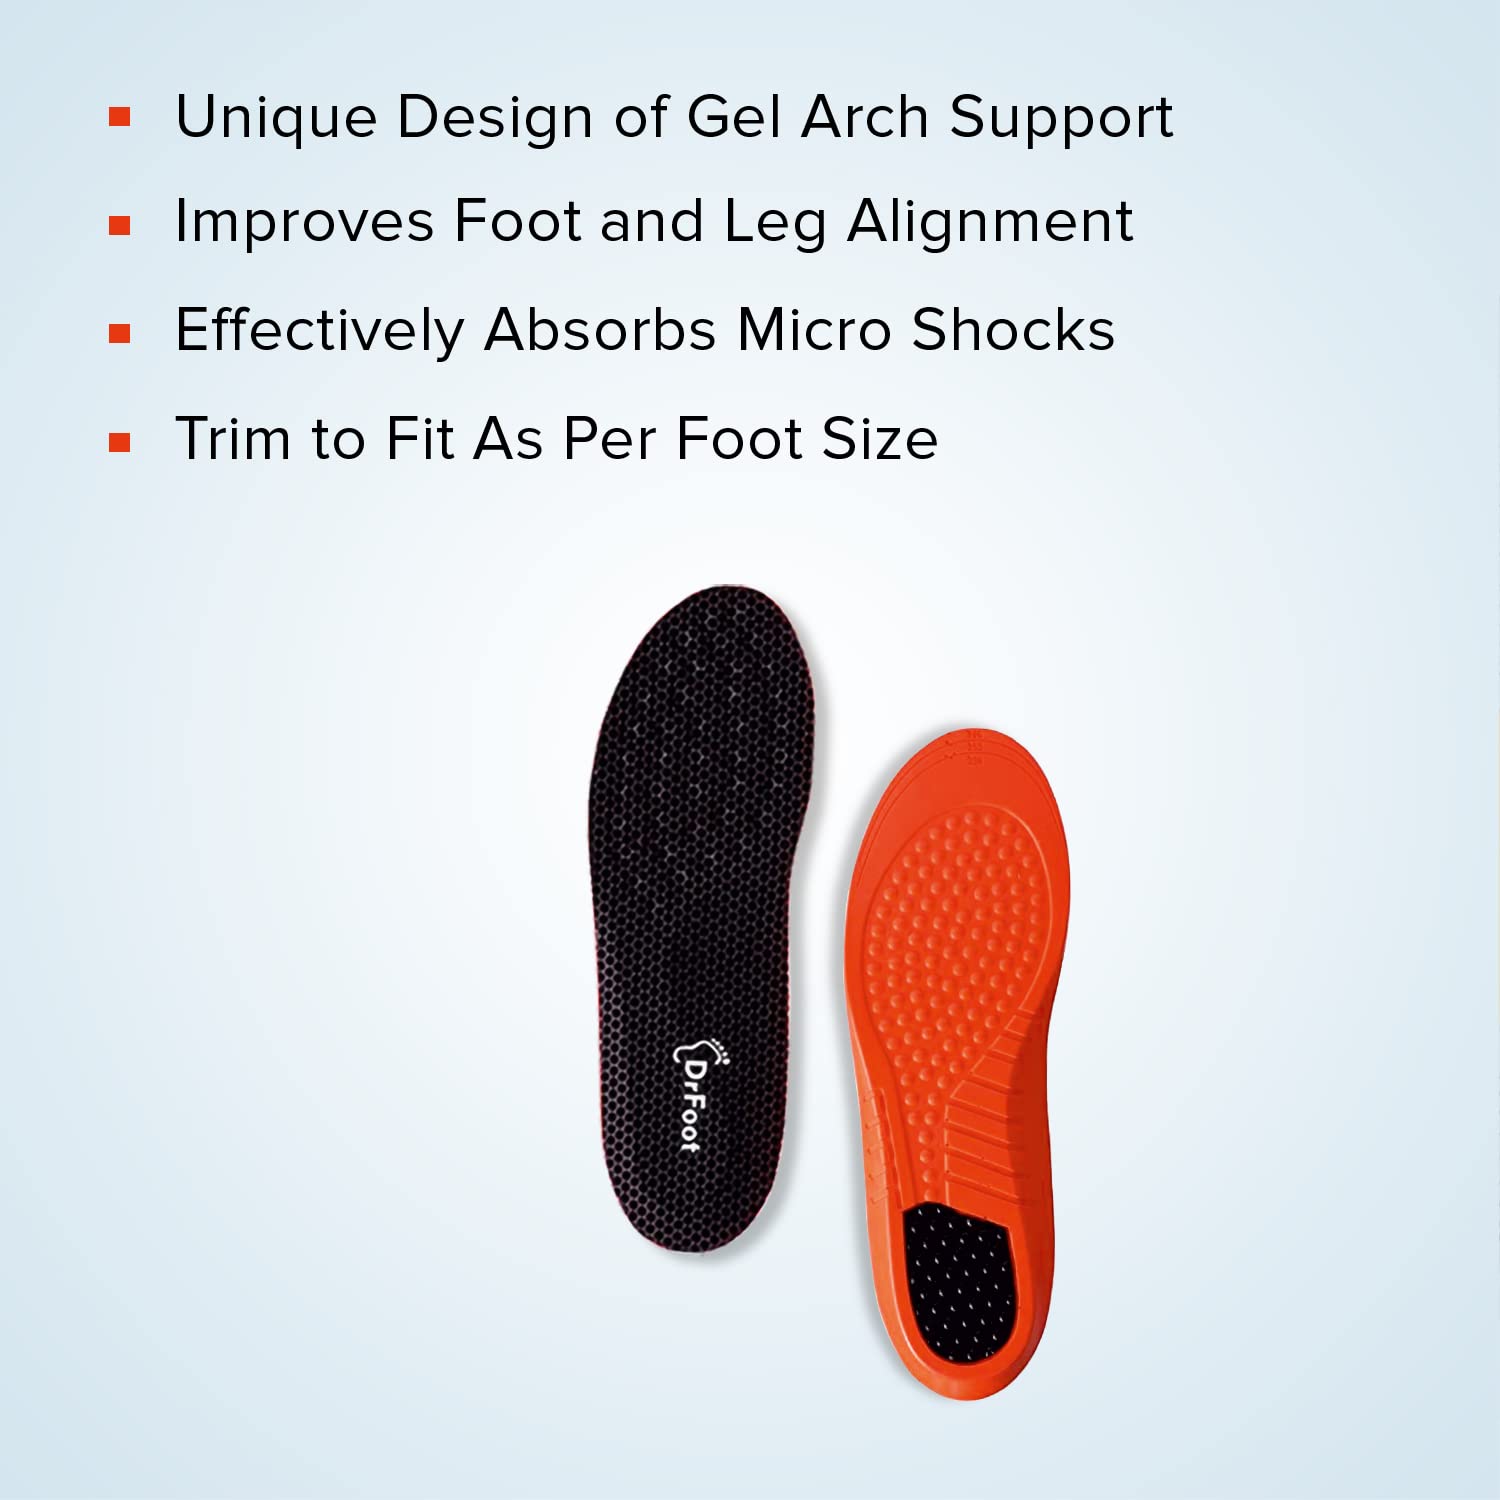 Dr Foot Arch Support Gel Insole Pair | For All-Day Comfort | Shoe Inserts for Flat Feet, High Arch, Foot Pain | Full-Length Orthotics | For Men & Women – 1 Pair (Medium Size) (Pack of 10)